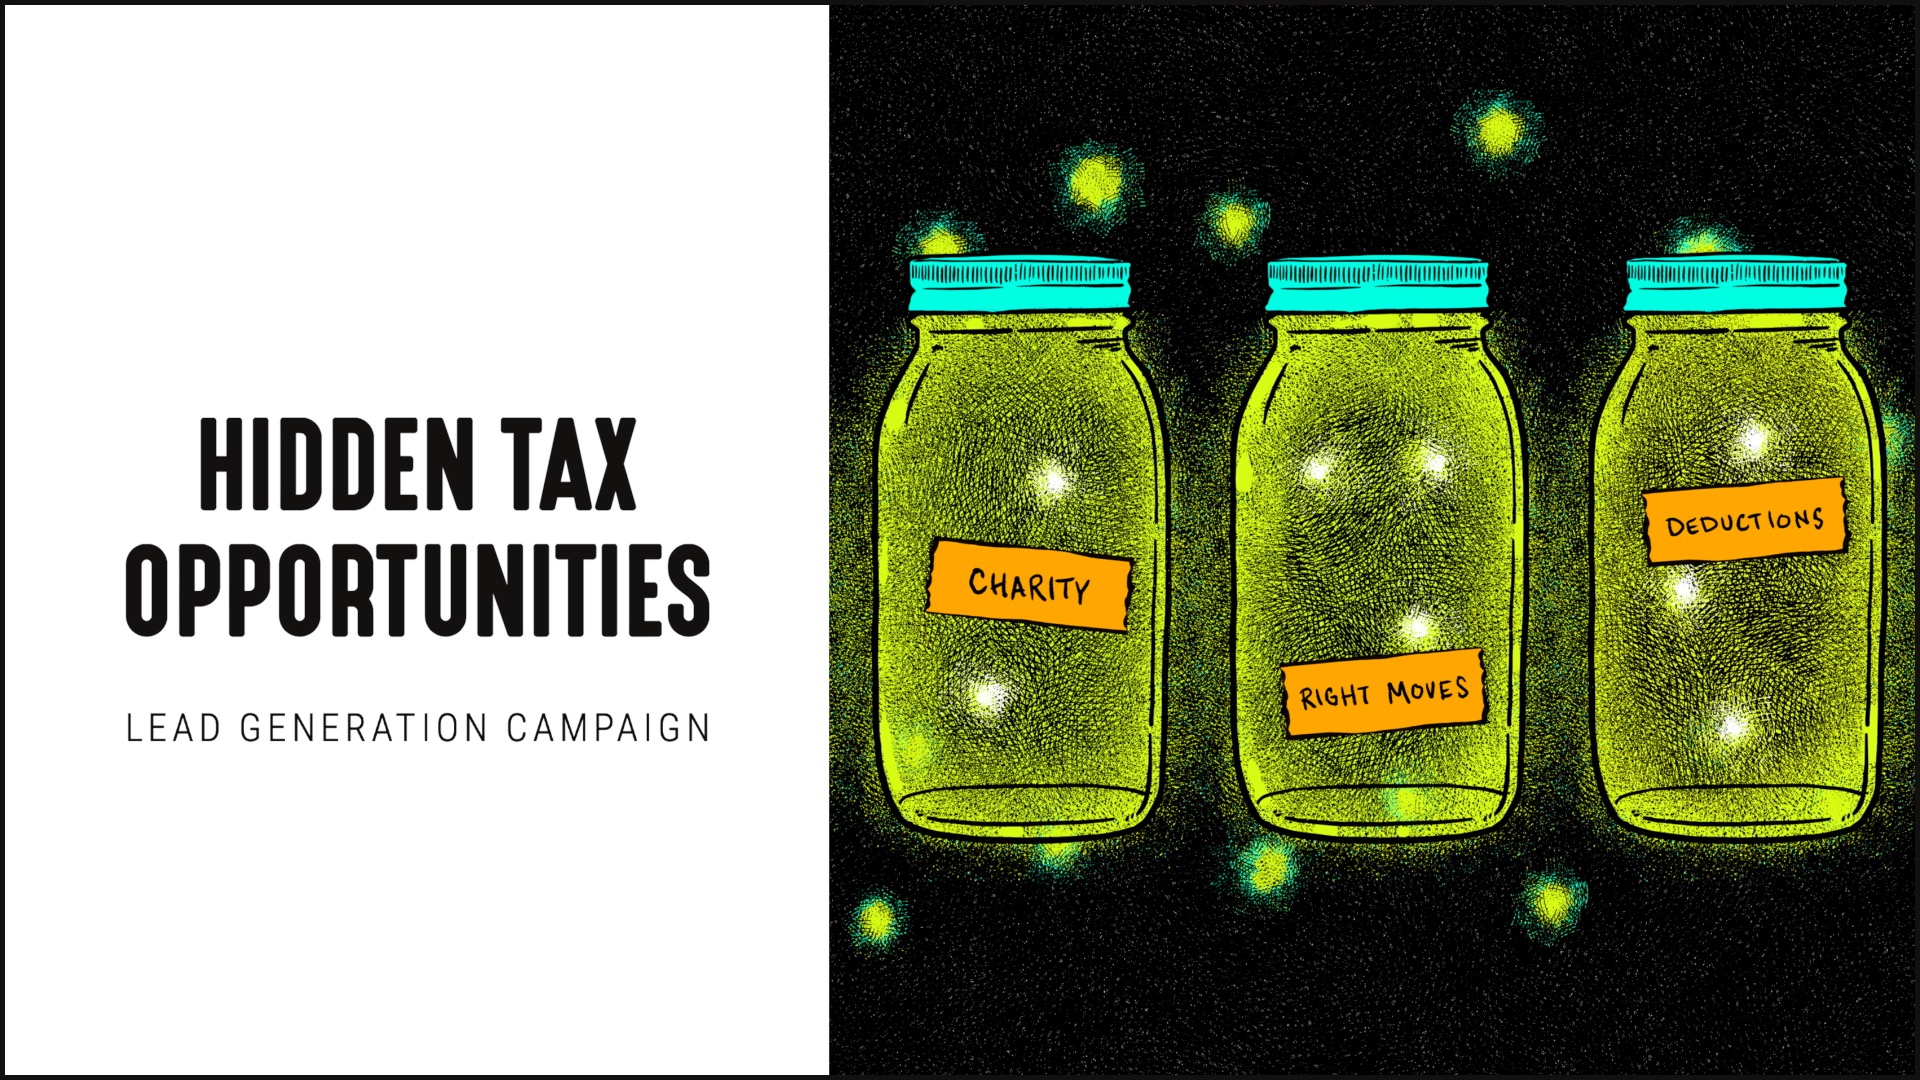 [NEW] Hidden Tax Opportunities - Lead Generation Campaign